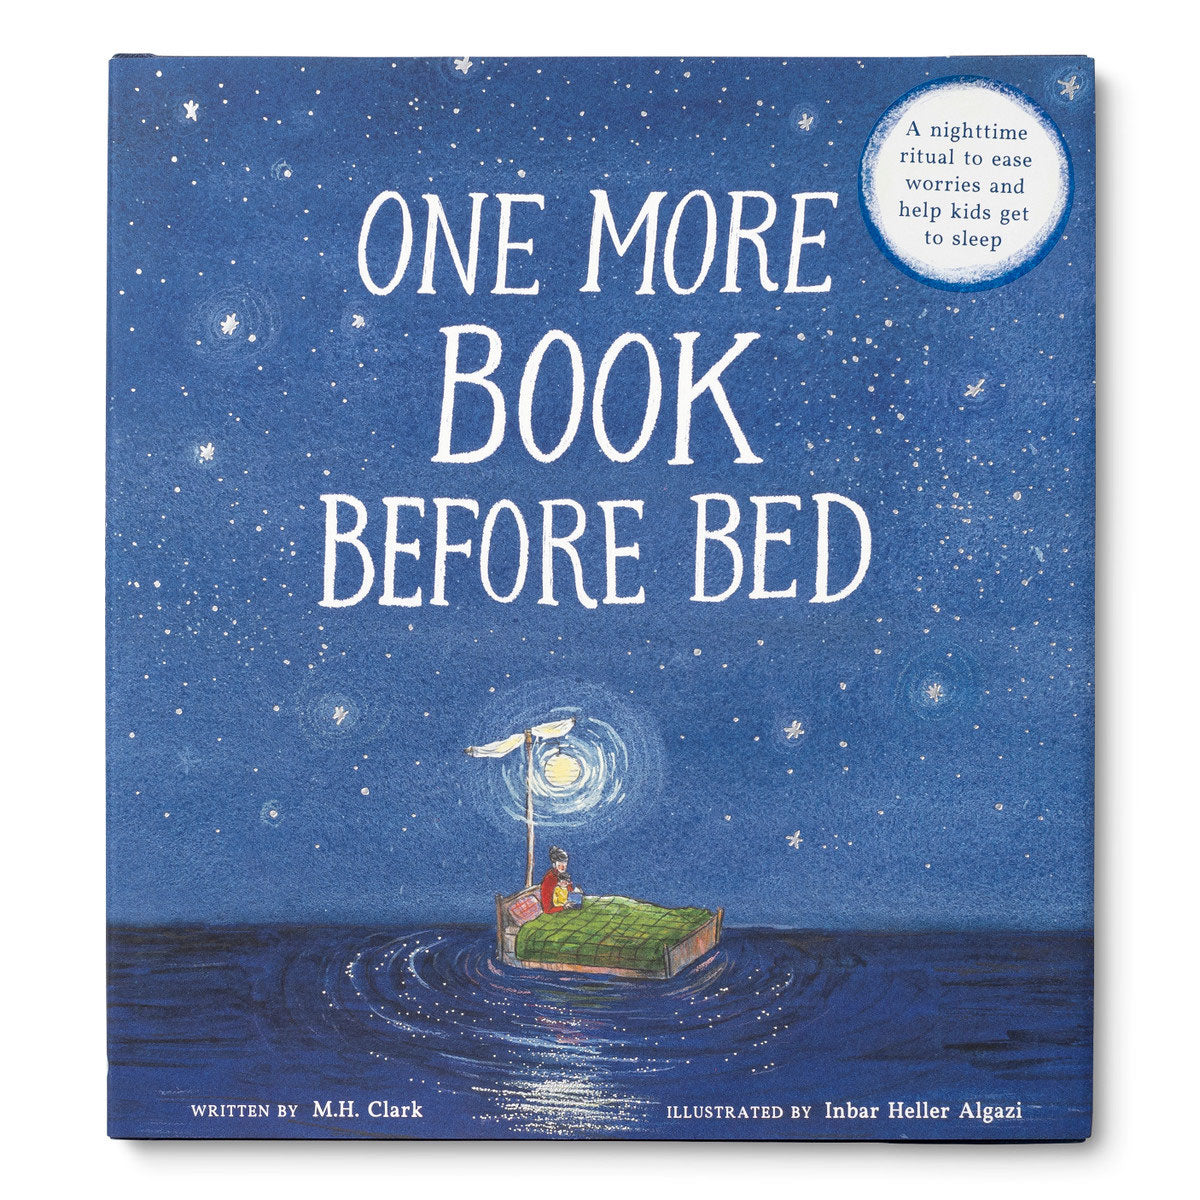 One More Book Before Bed by M.H. Clark